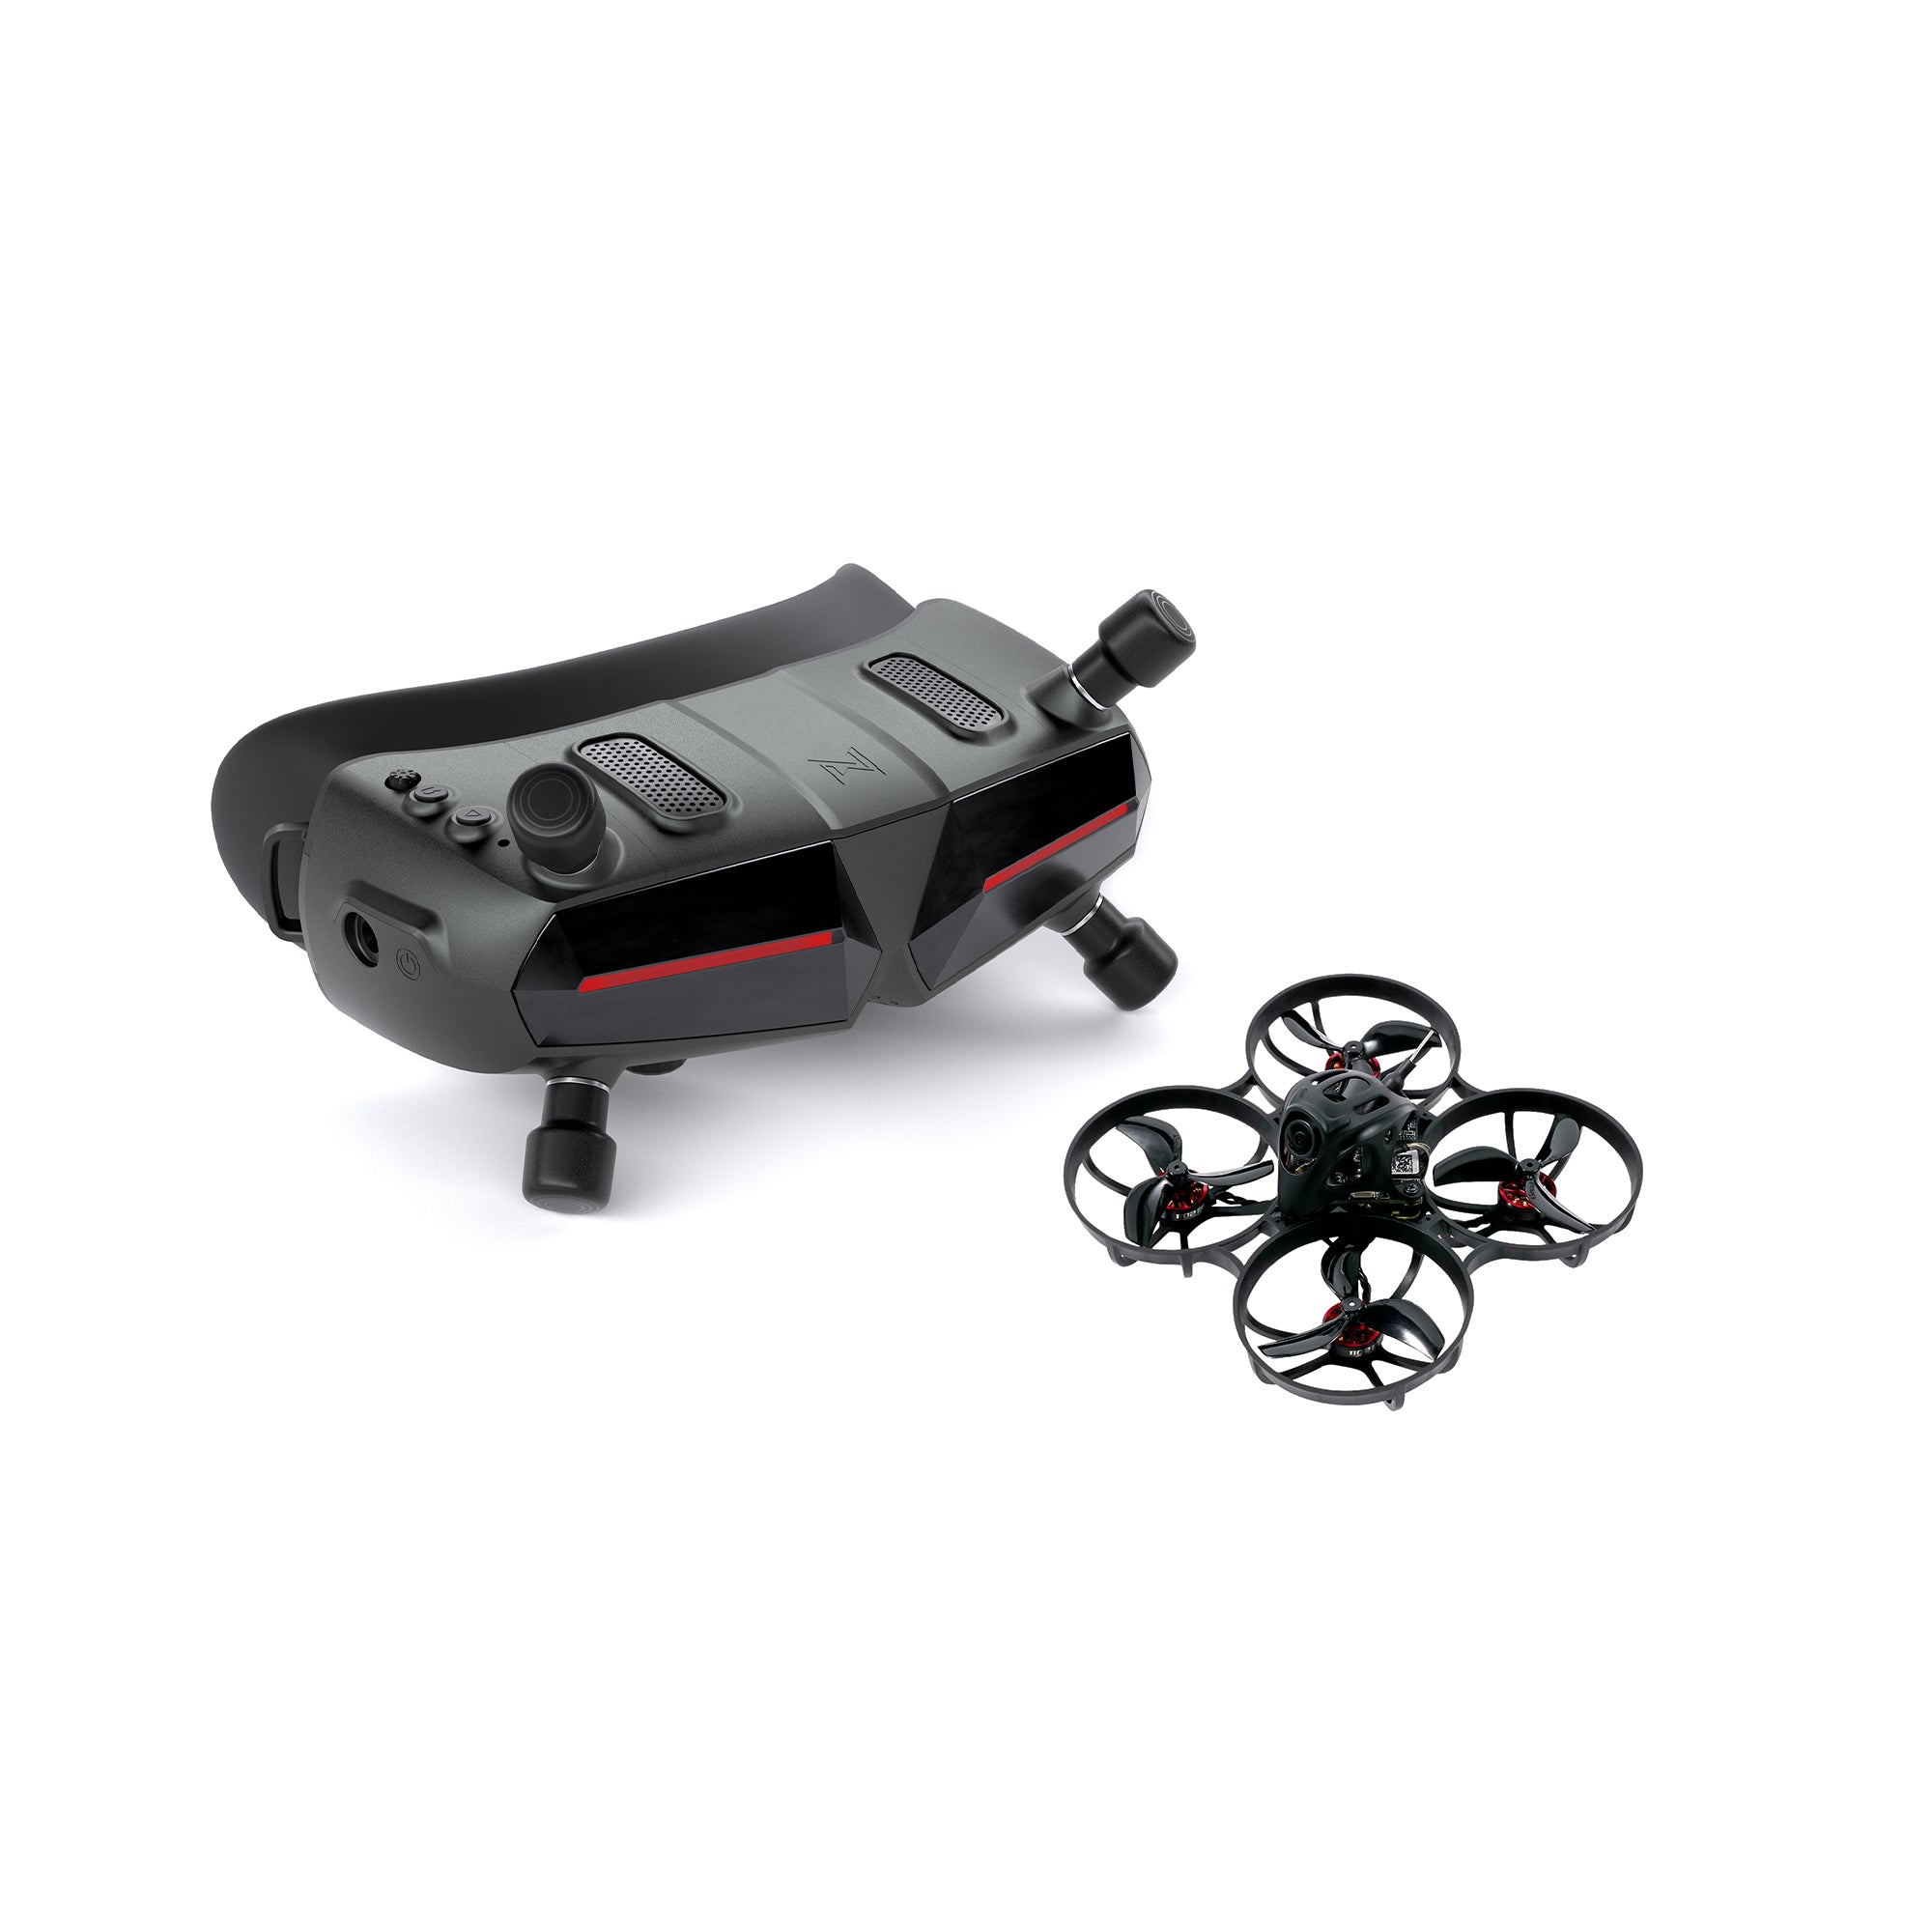 BETAFPV Meteor75 1S Micro FPV Whoop Drone Quadcopter for FPV Racing  Freestyle Flight Indoor Outdoor Fly Up to 6 Minutes with F4 1S 5A Flight